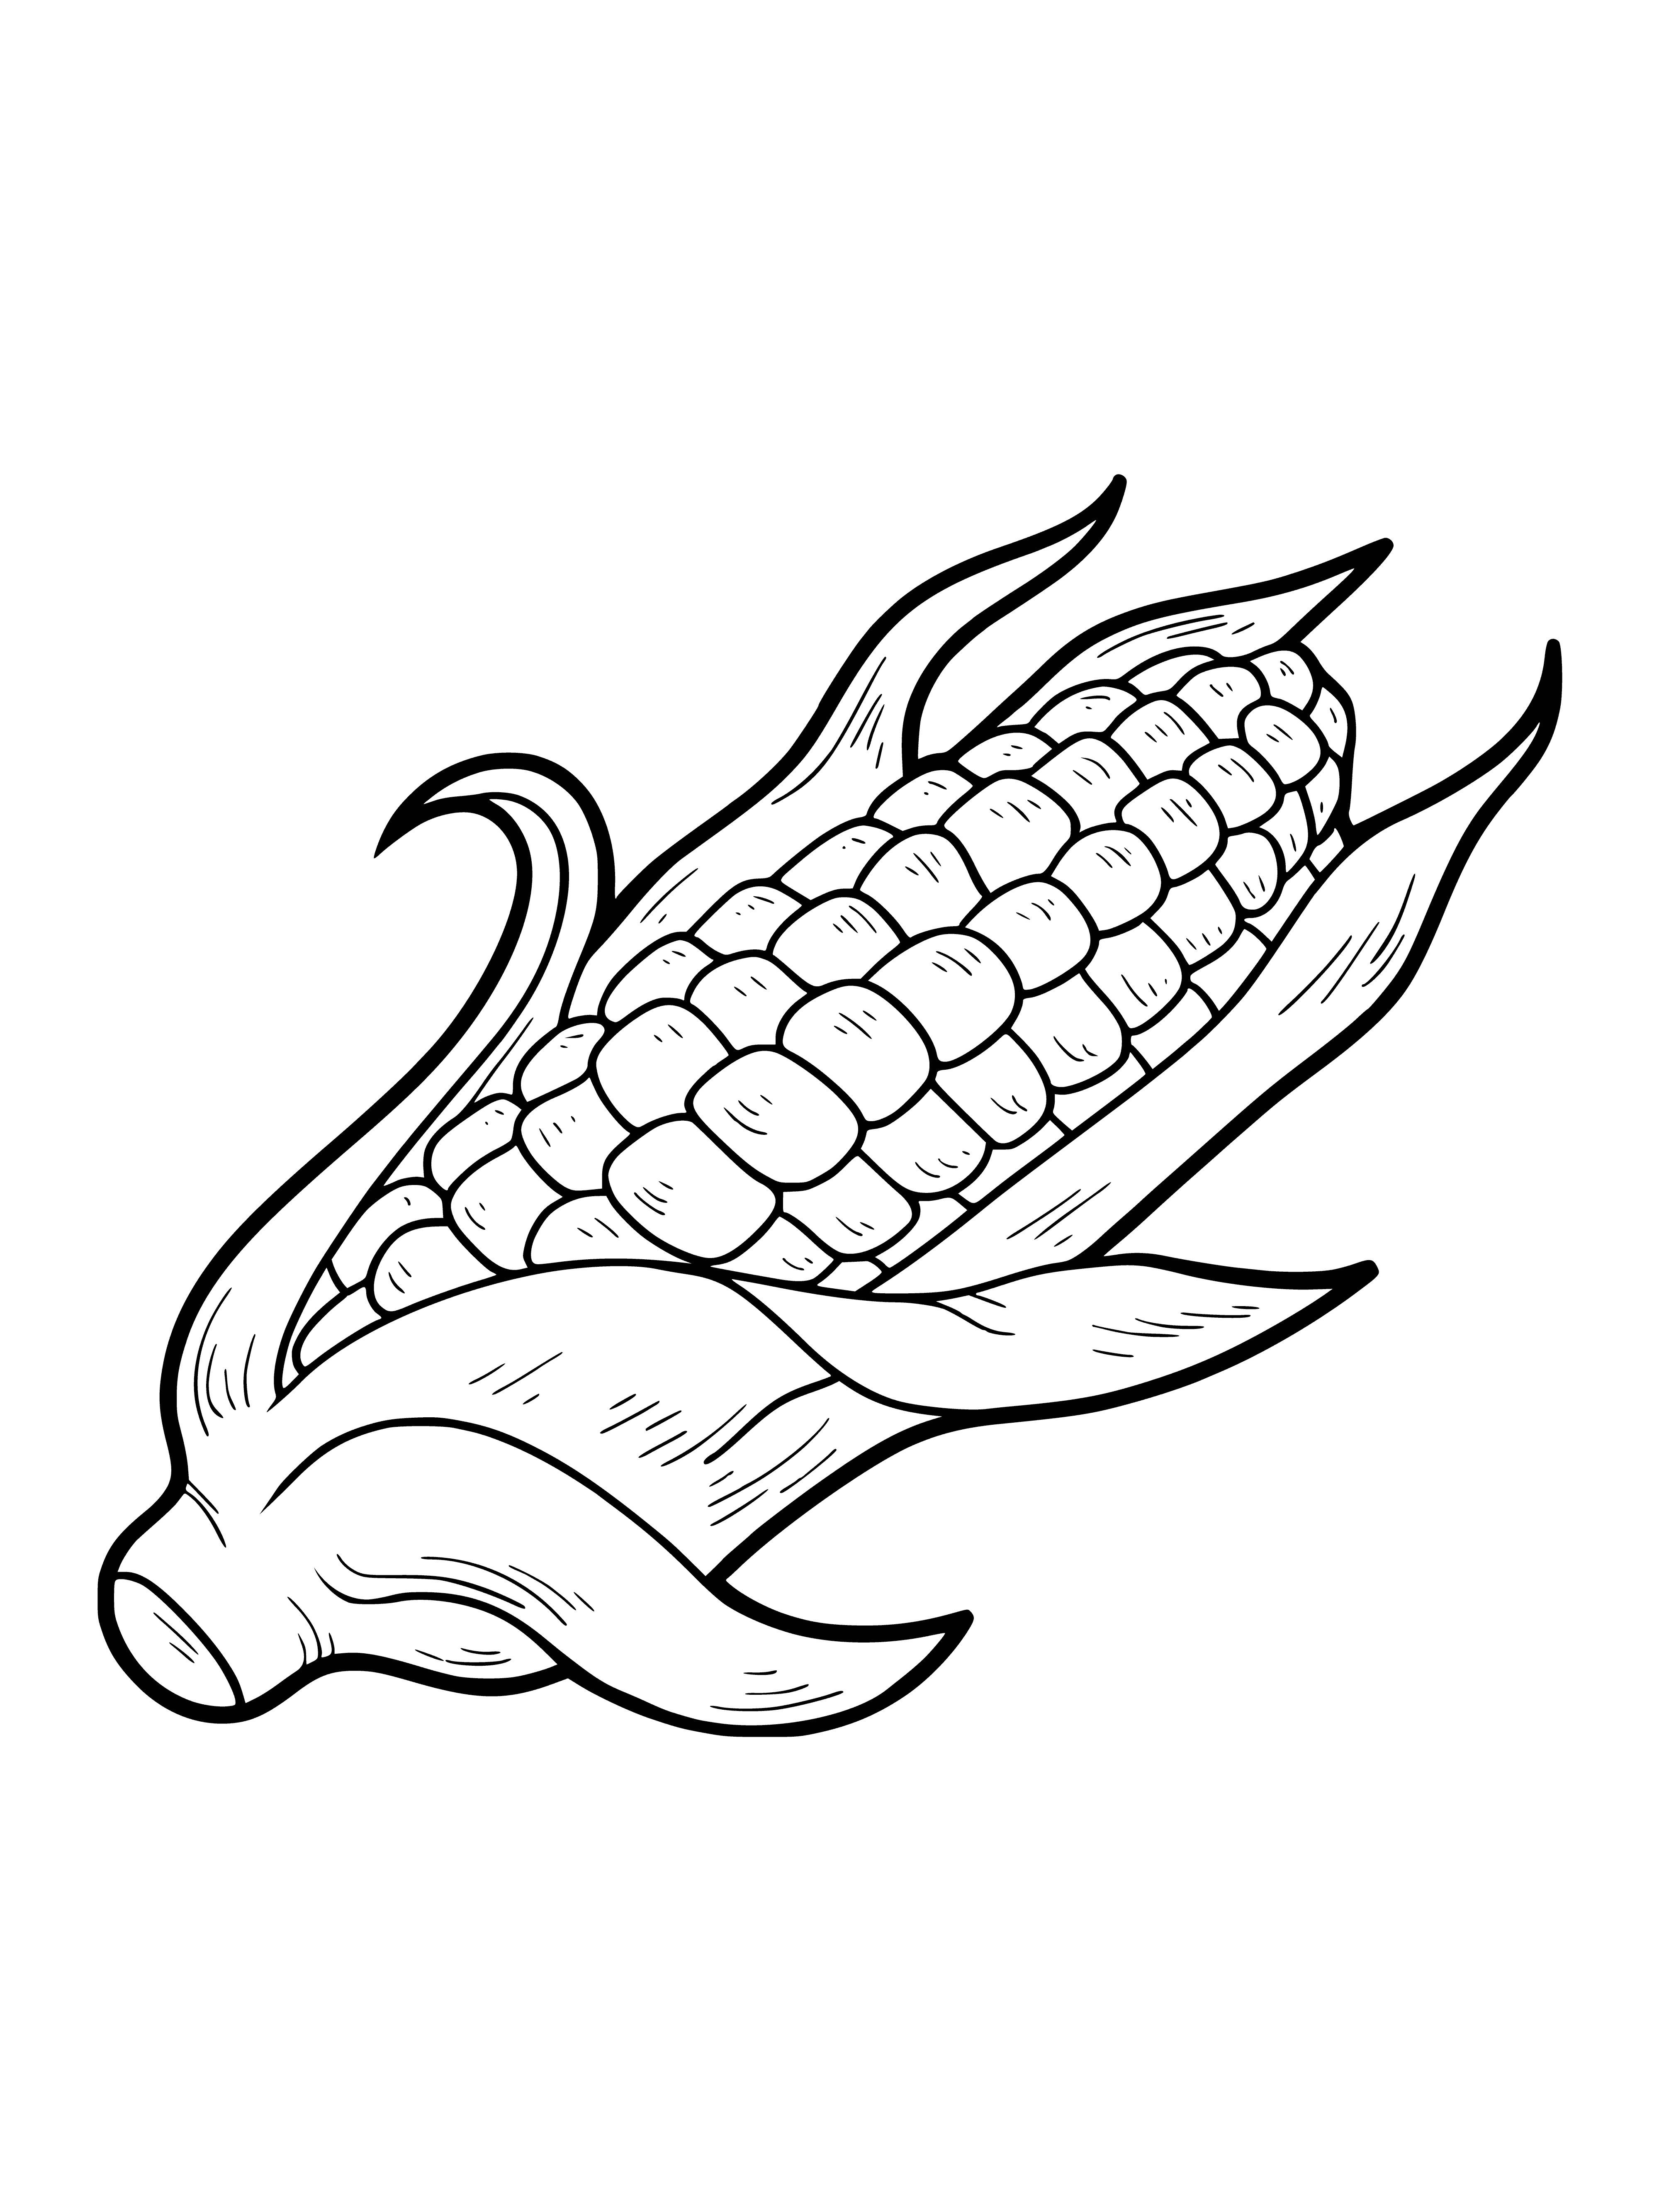 Corn coloring page